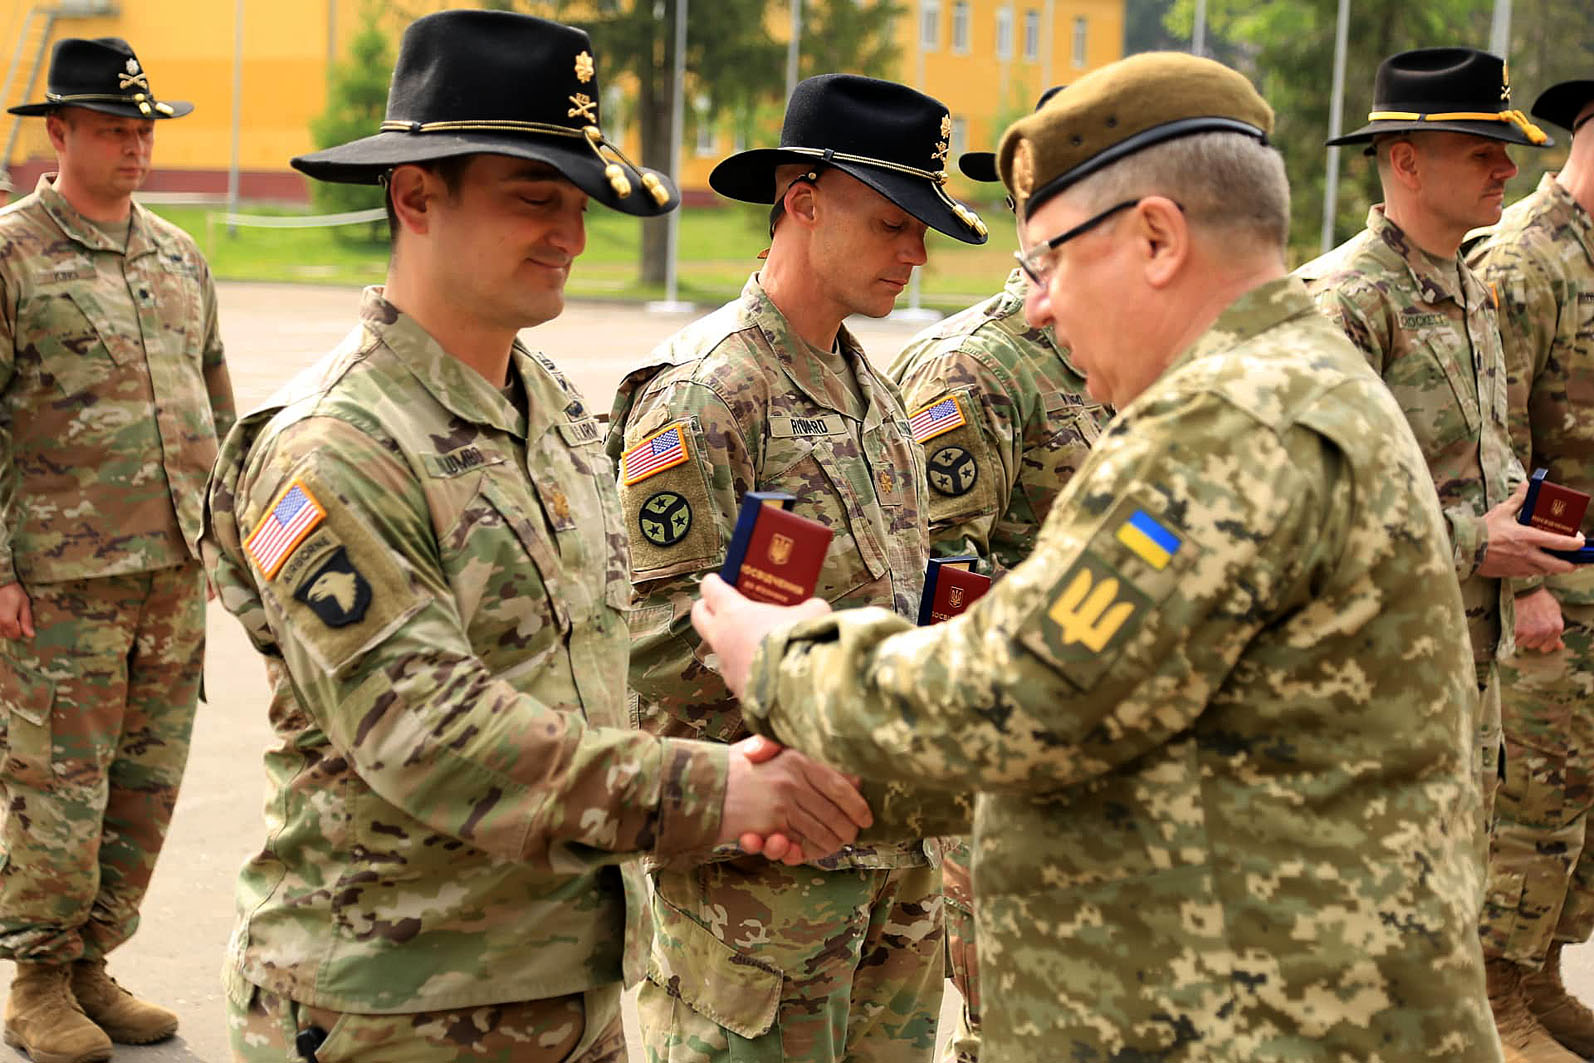 Ukraine&#8217;s Armed Forces Lieutenant General Pavlo Tkachuk decorates U.S. Army personnel during the transfer of authority ceremony of the JMTG-U training mission at the Yavoriv training range on May 2, 2019.